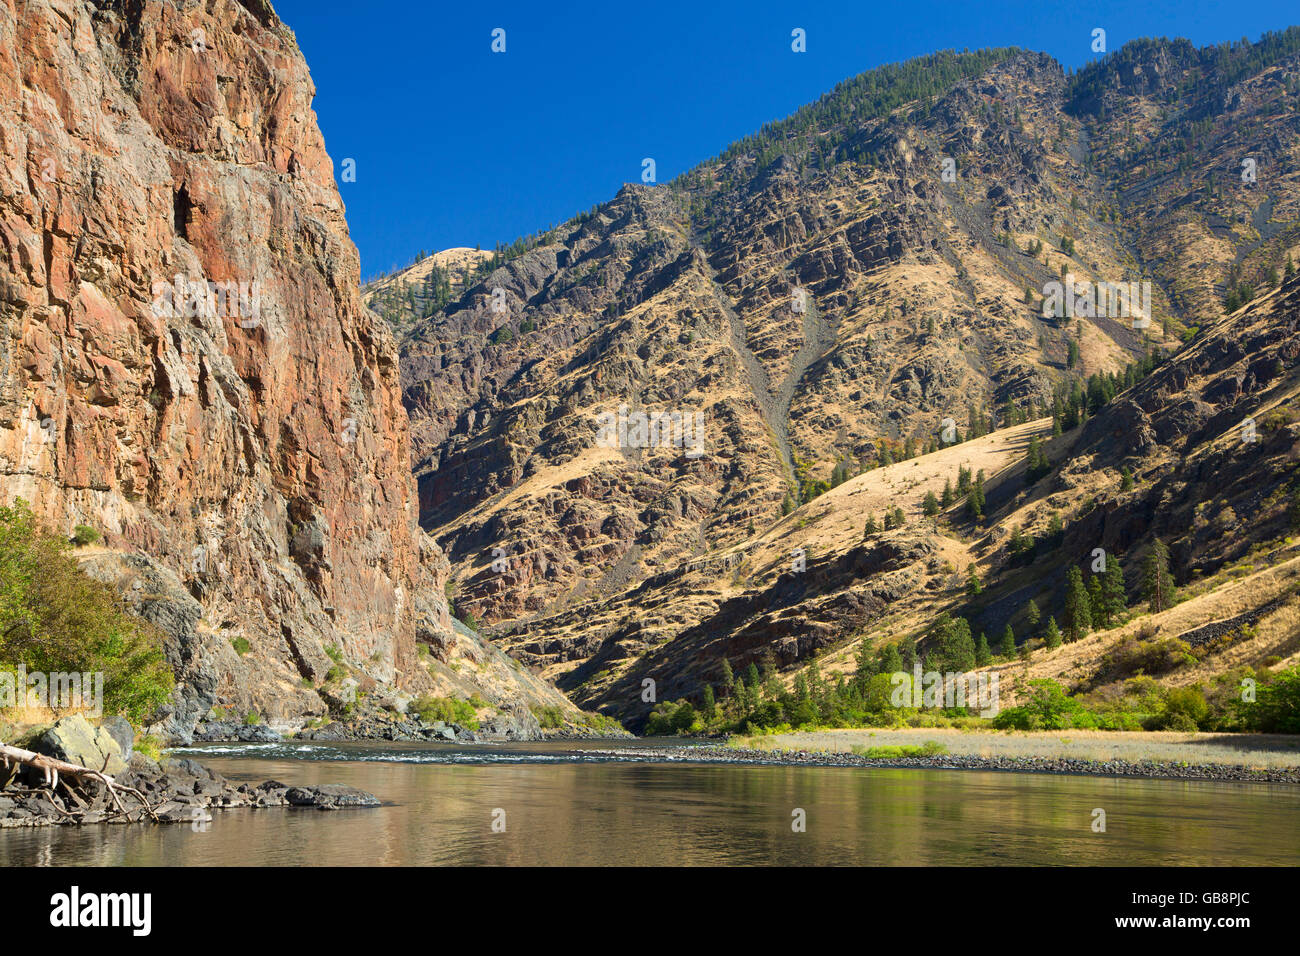 Snake Wild and Scenic River le long du sentier de goujon, Hells Canyon National Recreation Area, New York Banque D'Images